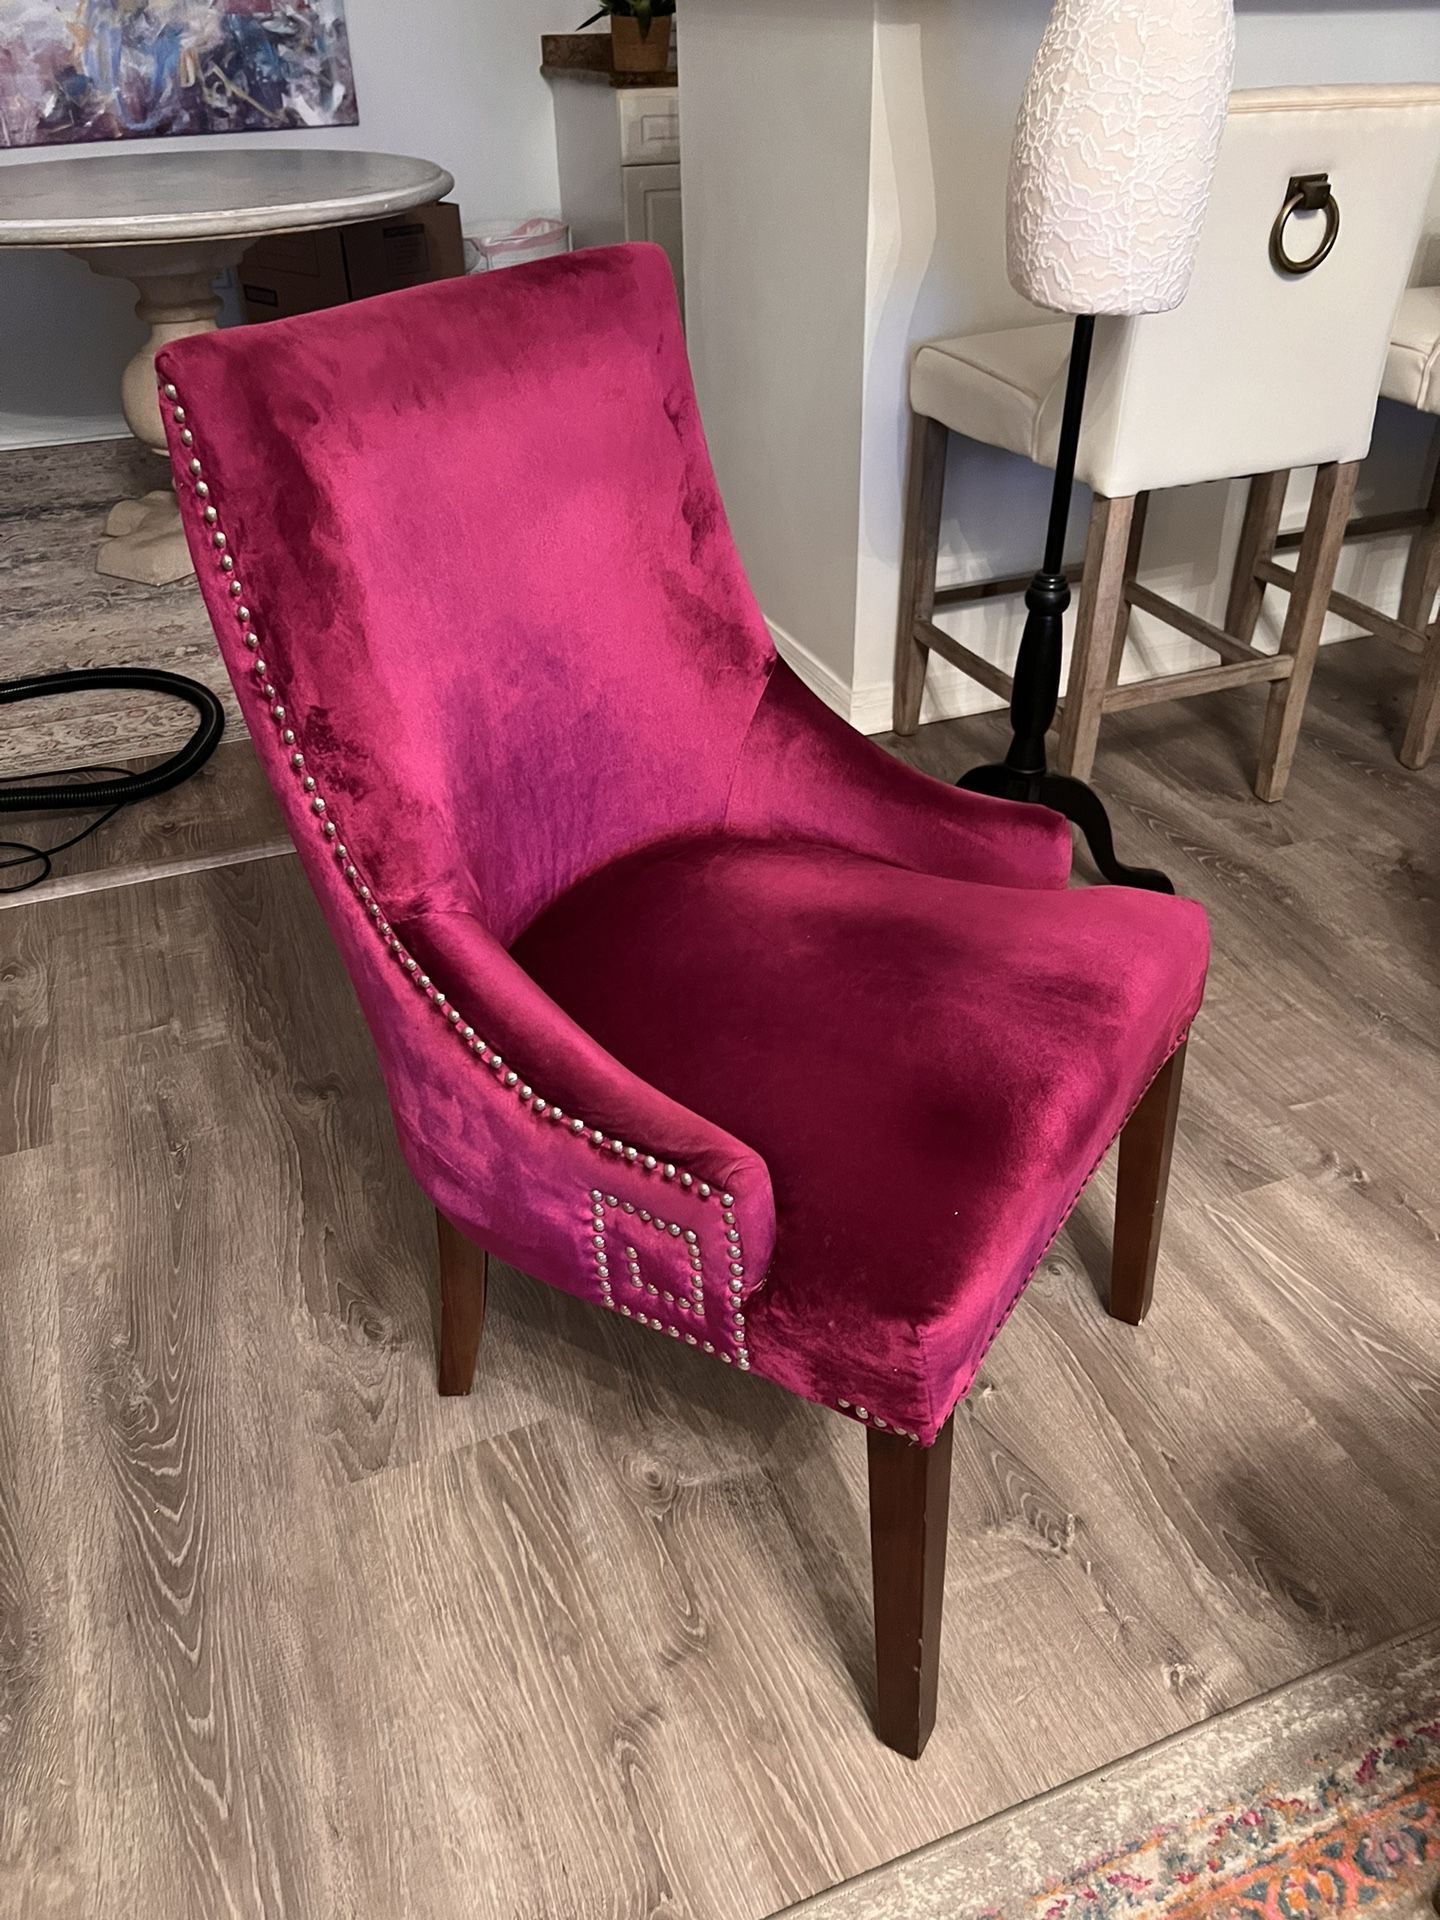 2 STUNNING DECORATIVE OVERSIZED DARK PINK SITTING OR DINING CHAIRS